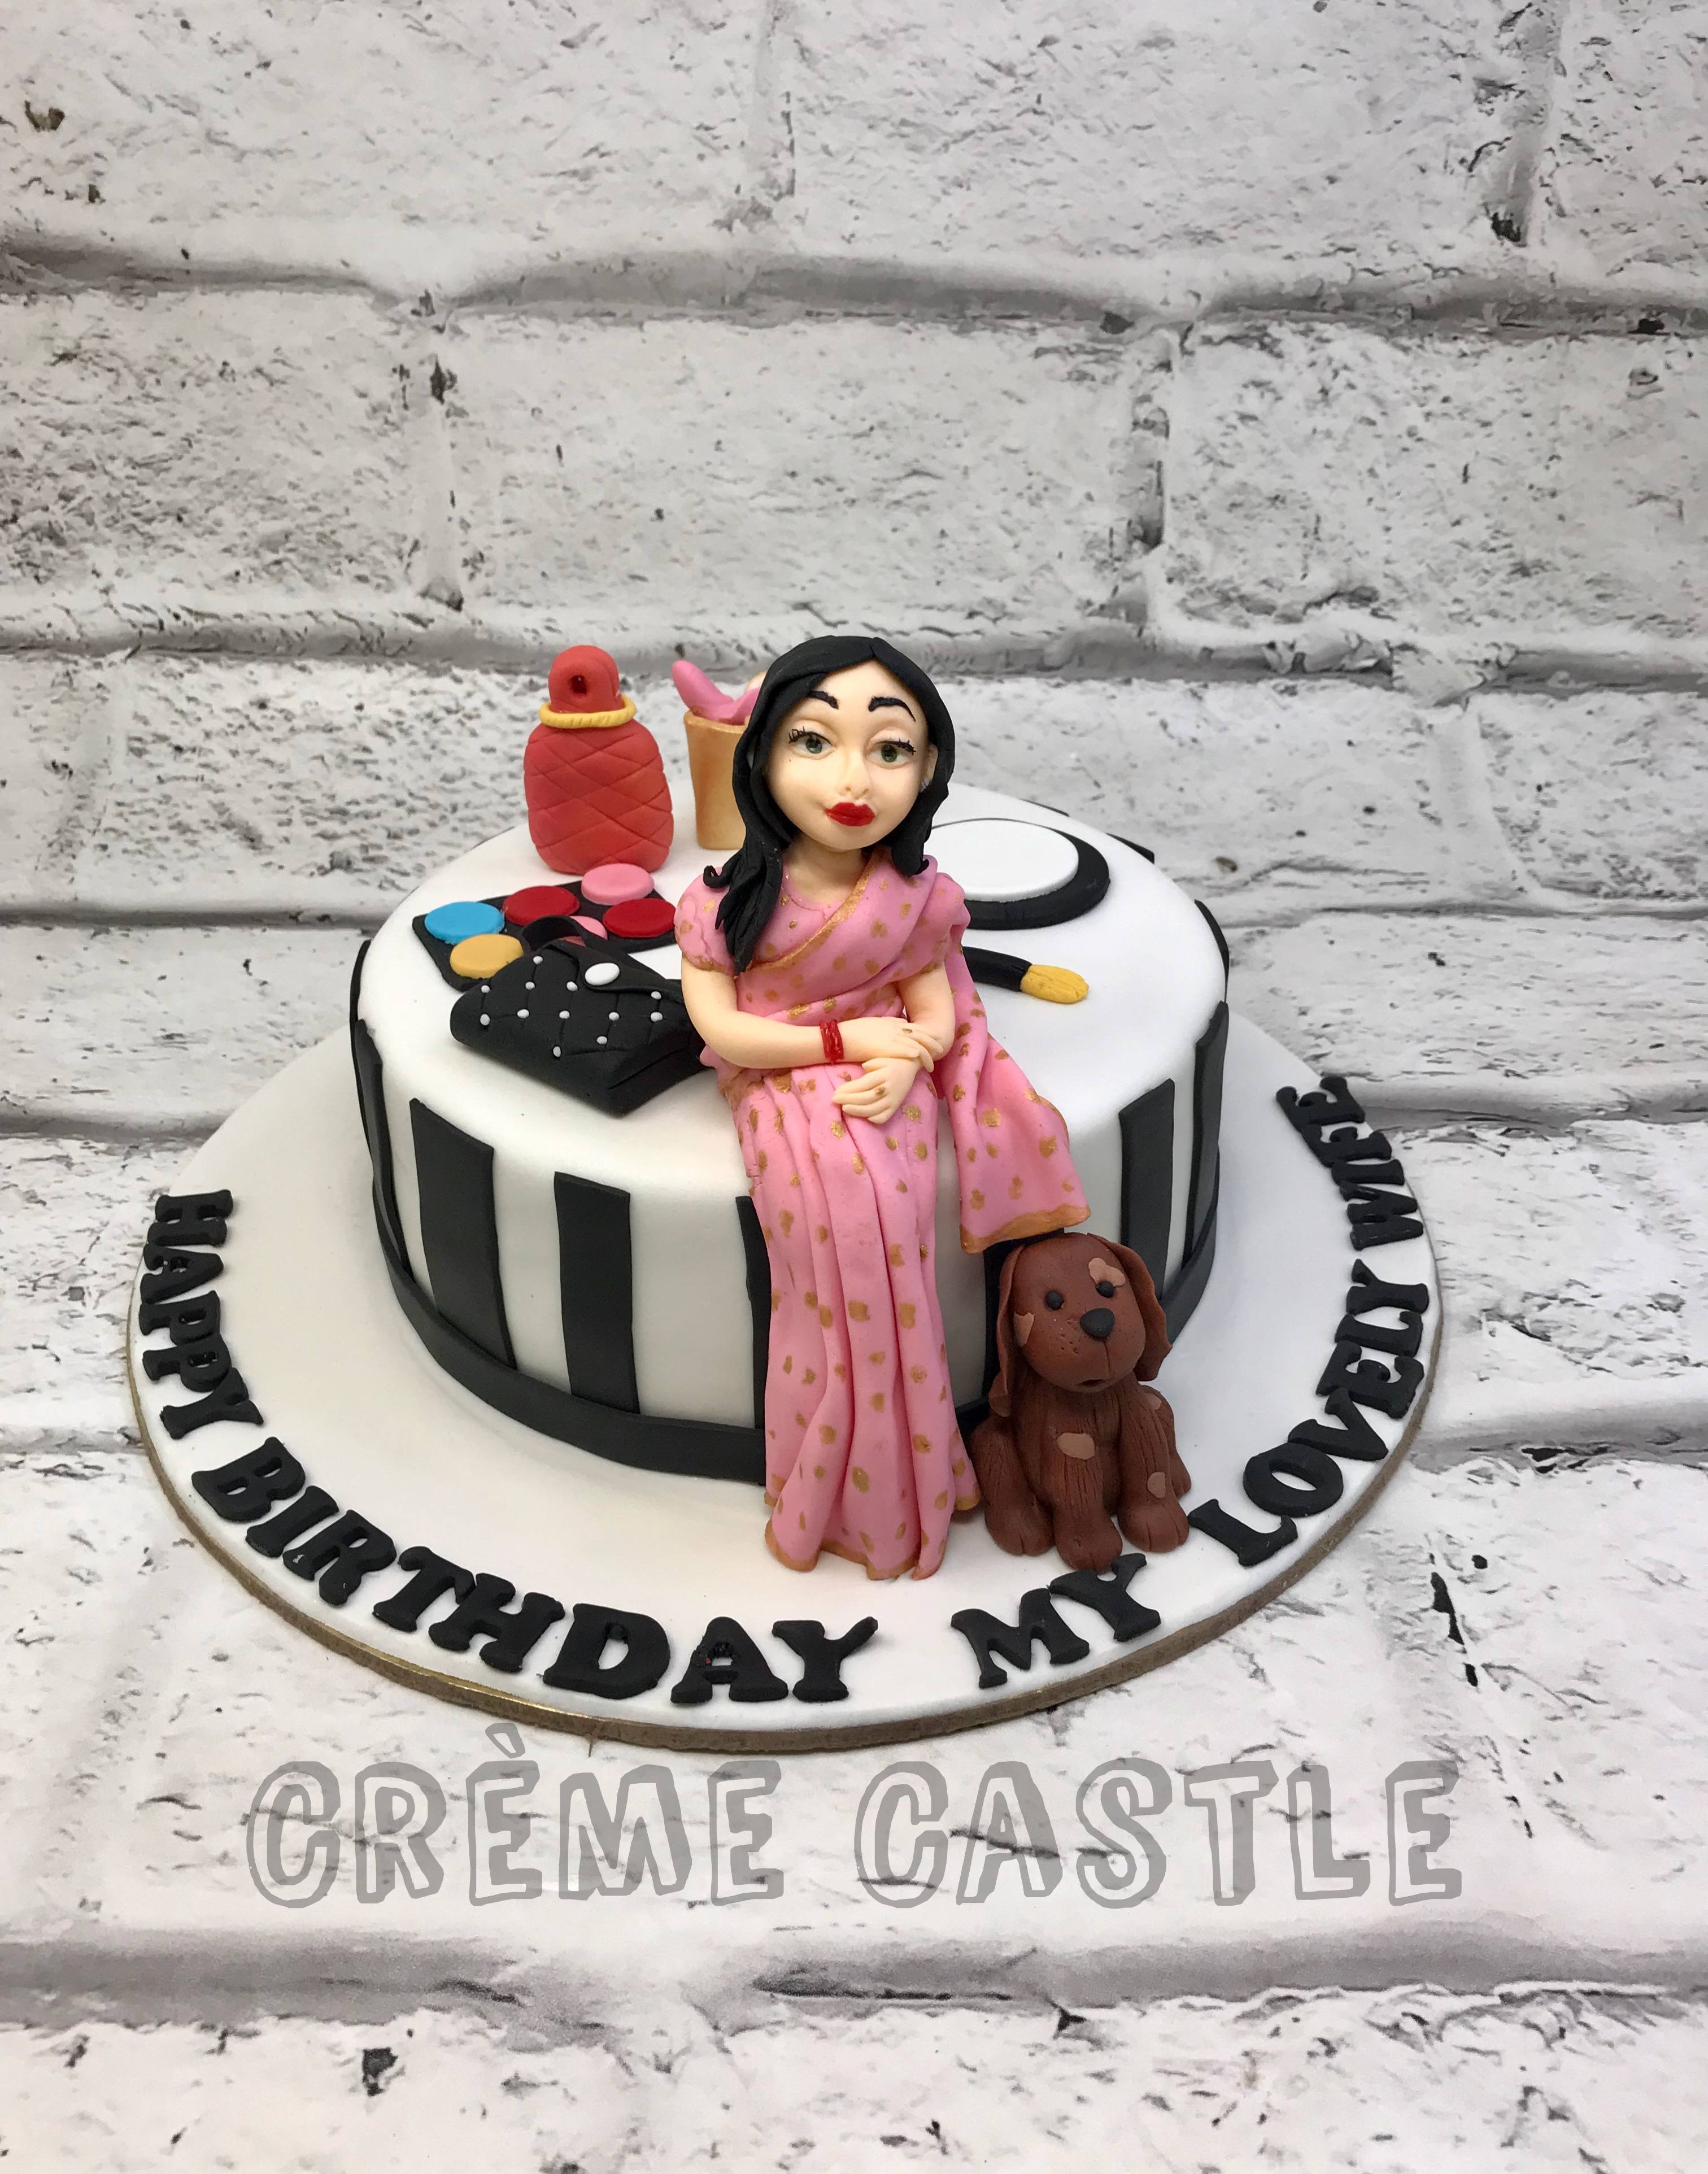 Birthday Cake For Wife | Make her birthday special with cakes